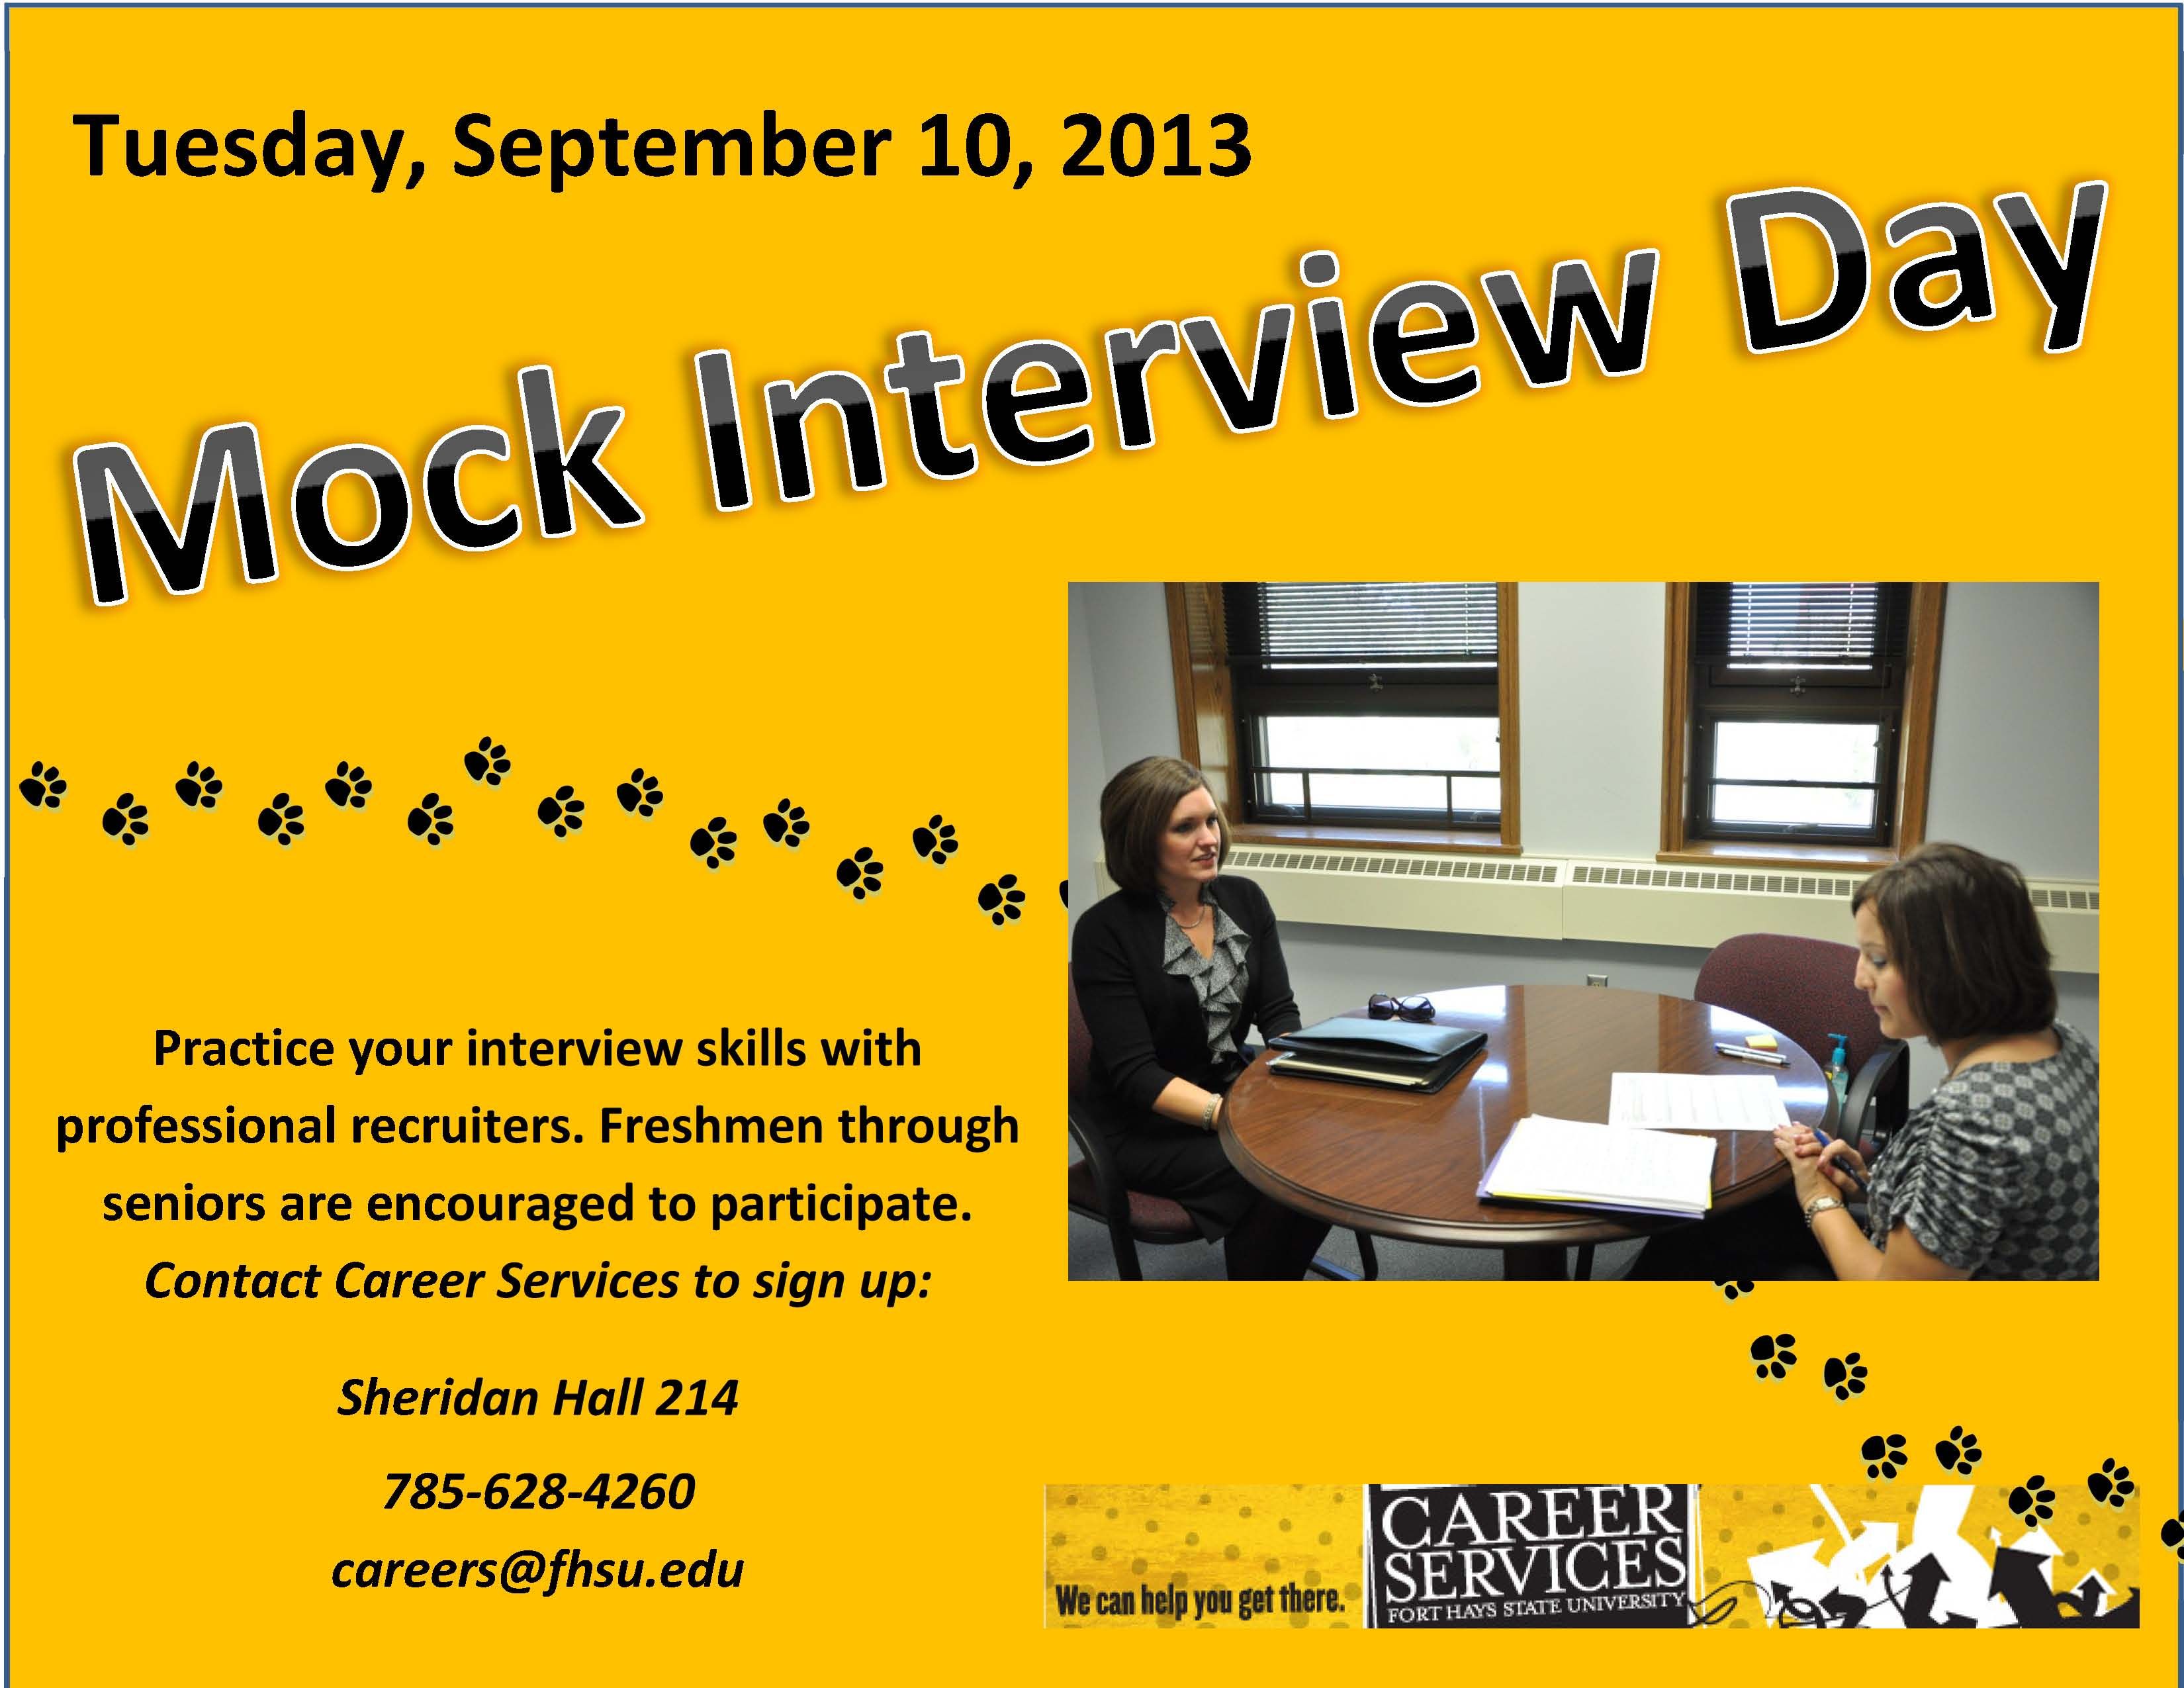 FHSU Career Services Mock Interview Day Tuesday, September 10, 2013